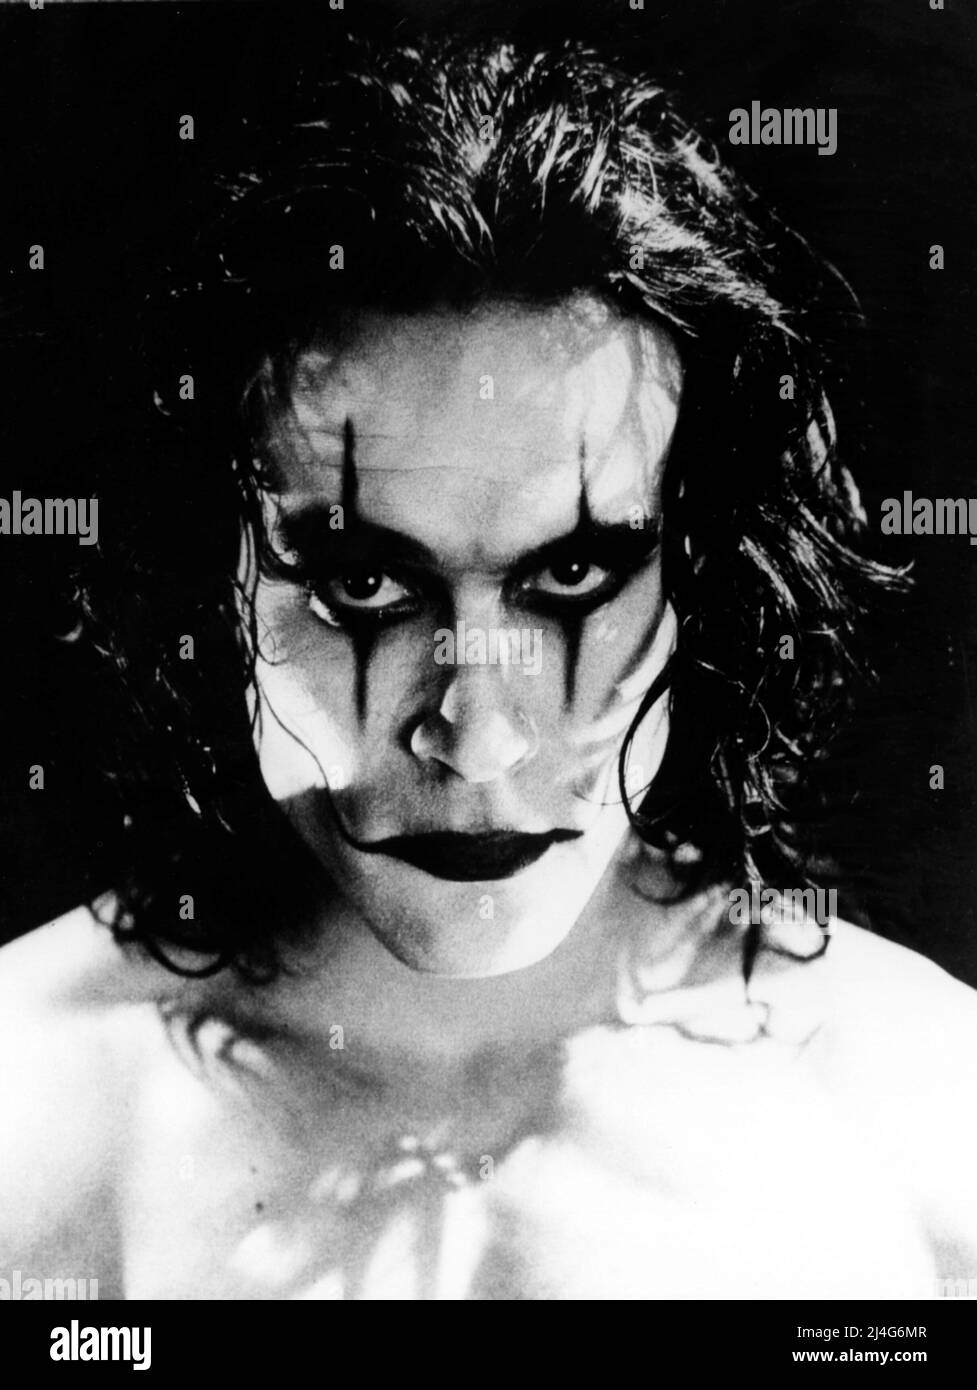 The crow 1994 Black and White Stock Photos & Images - Alamy